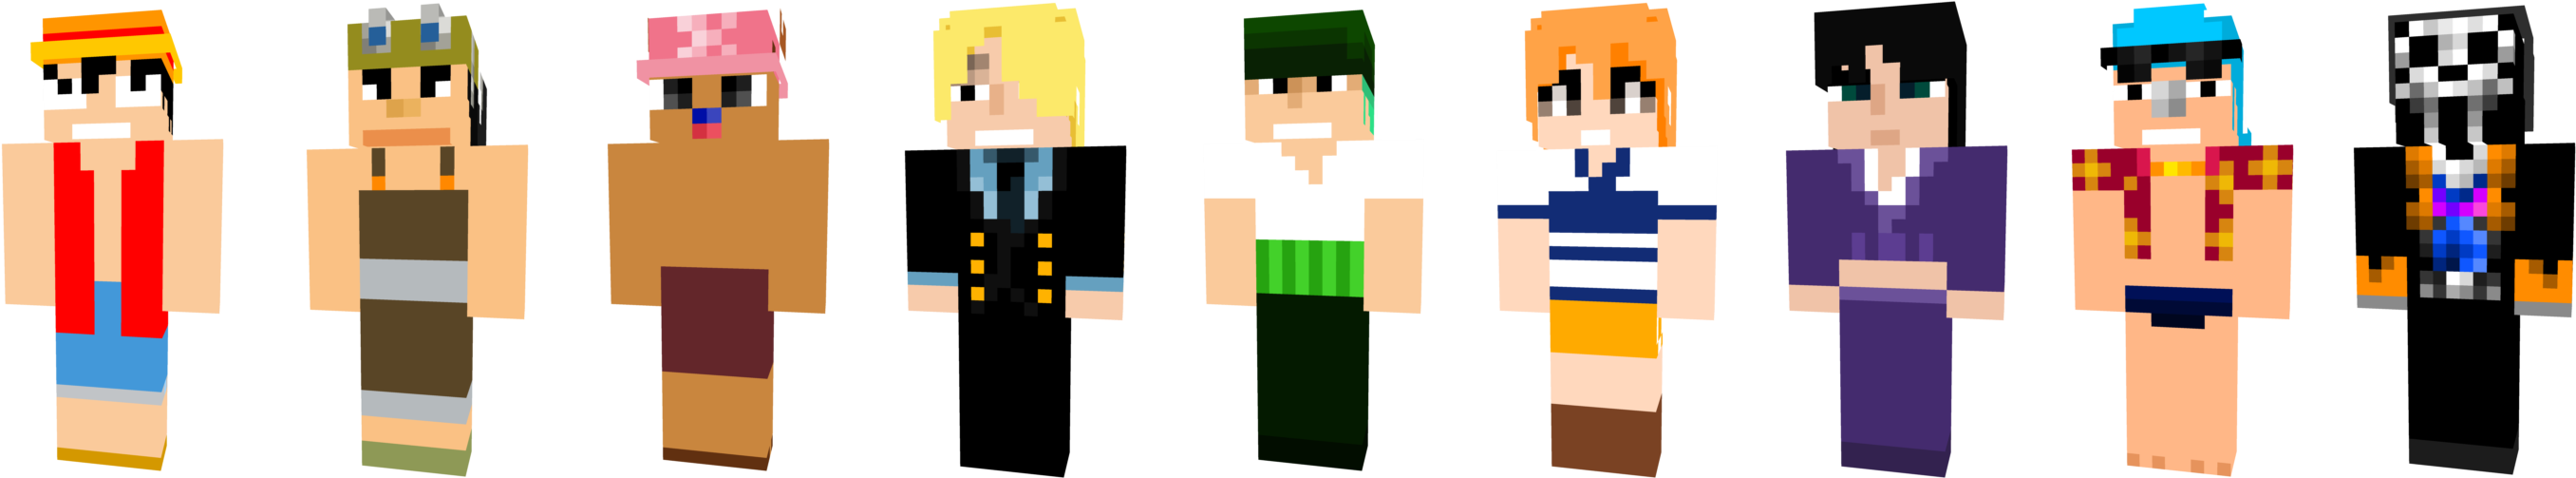 Male Characters - Mr - 0, Mr - 1, Mr - 2, Mr - 3, Mr - One Piece Minecraft Skins Zorro (2888x640), Png Download